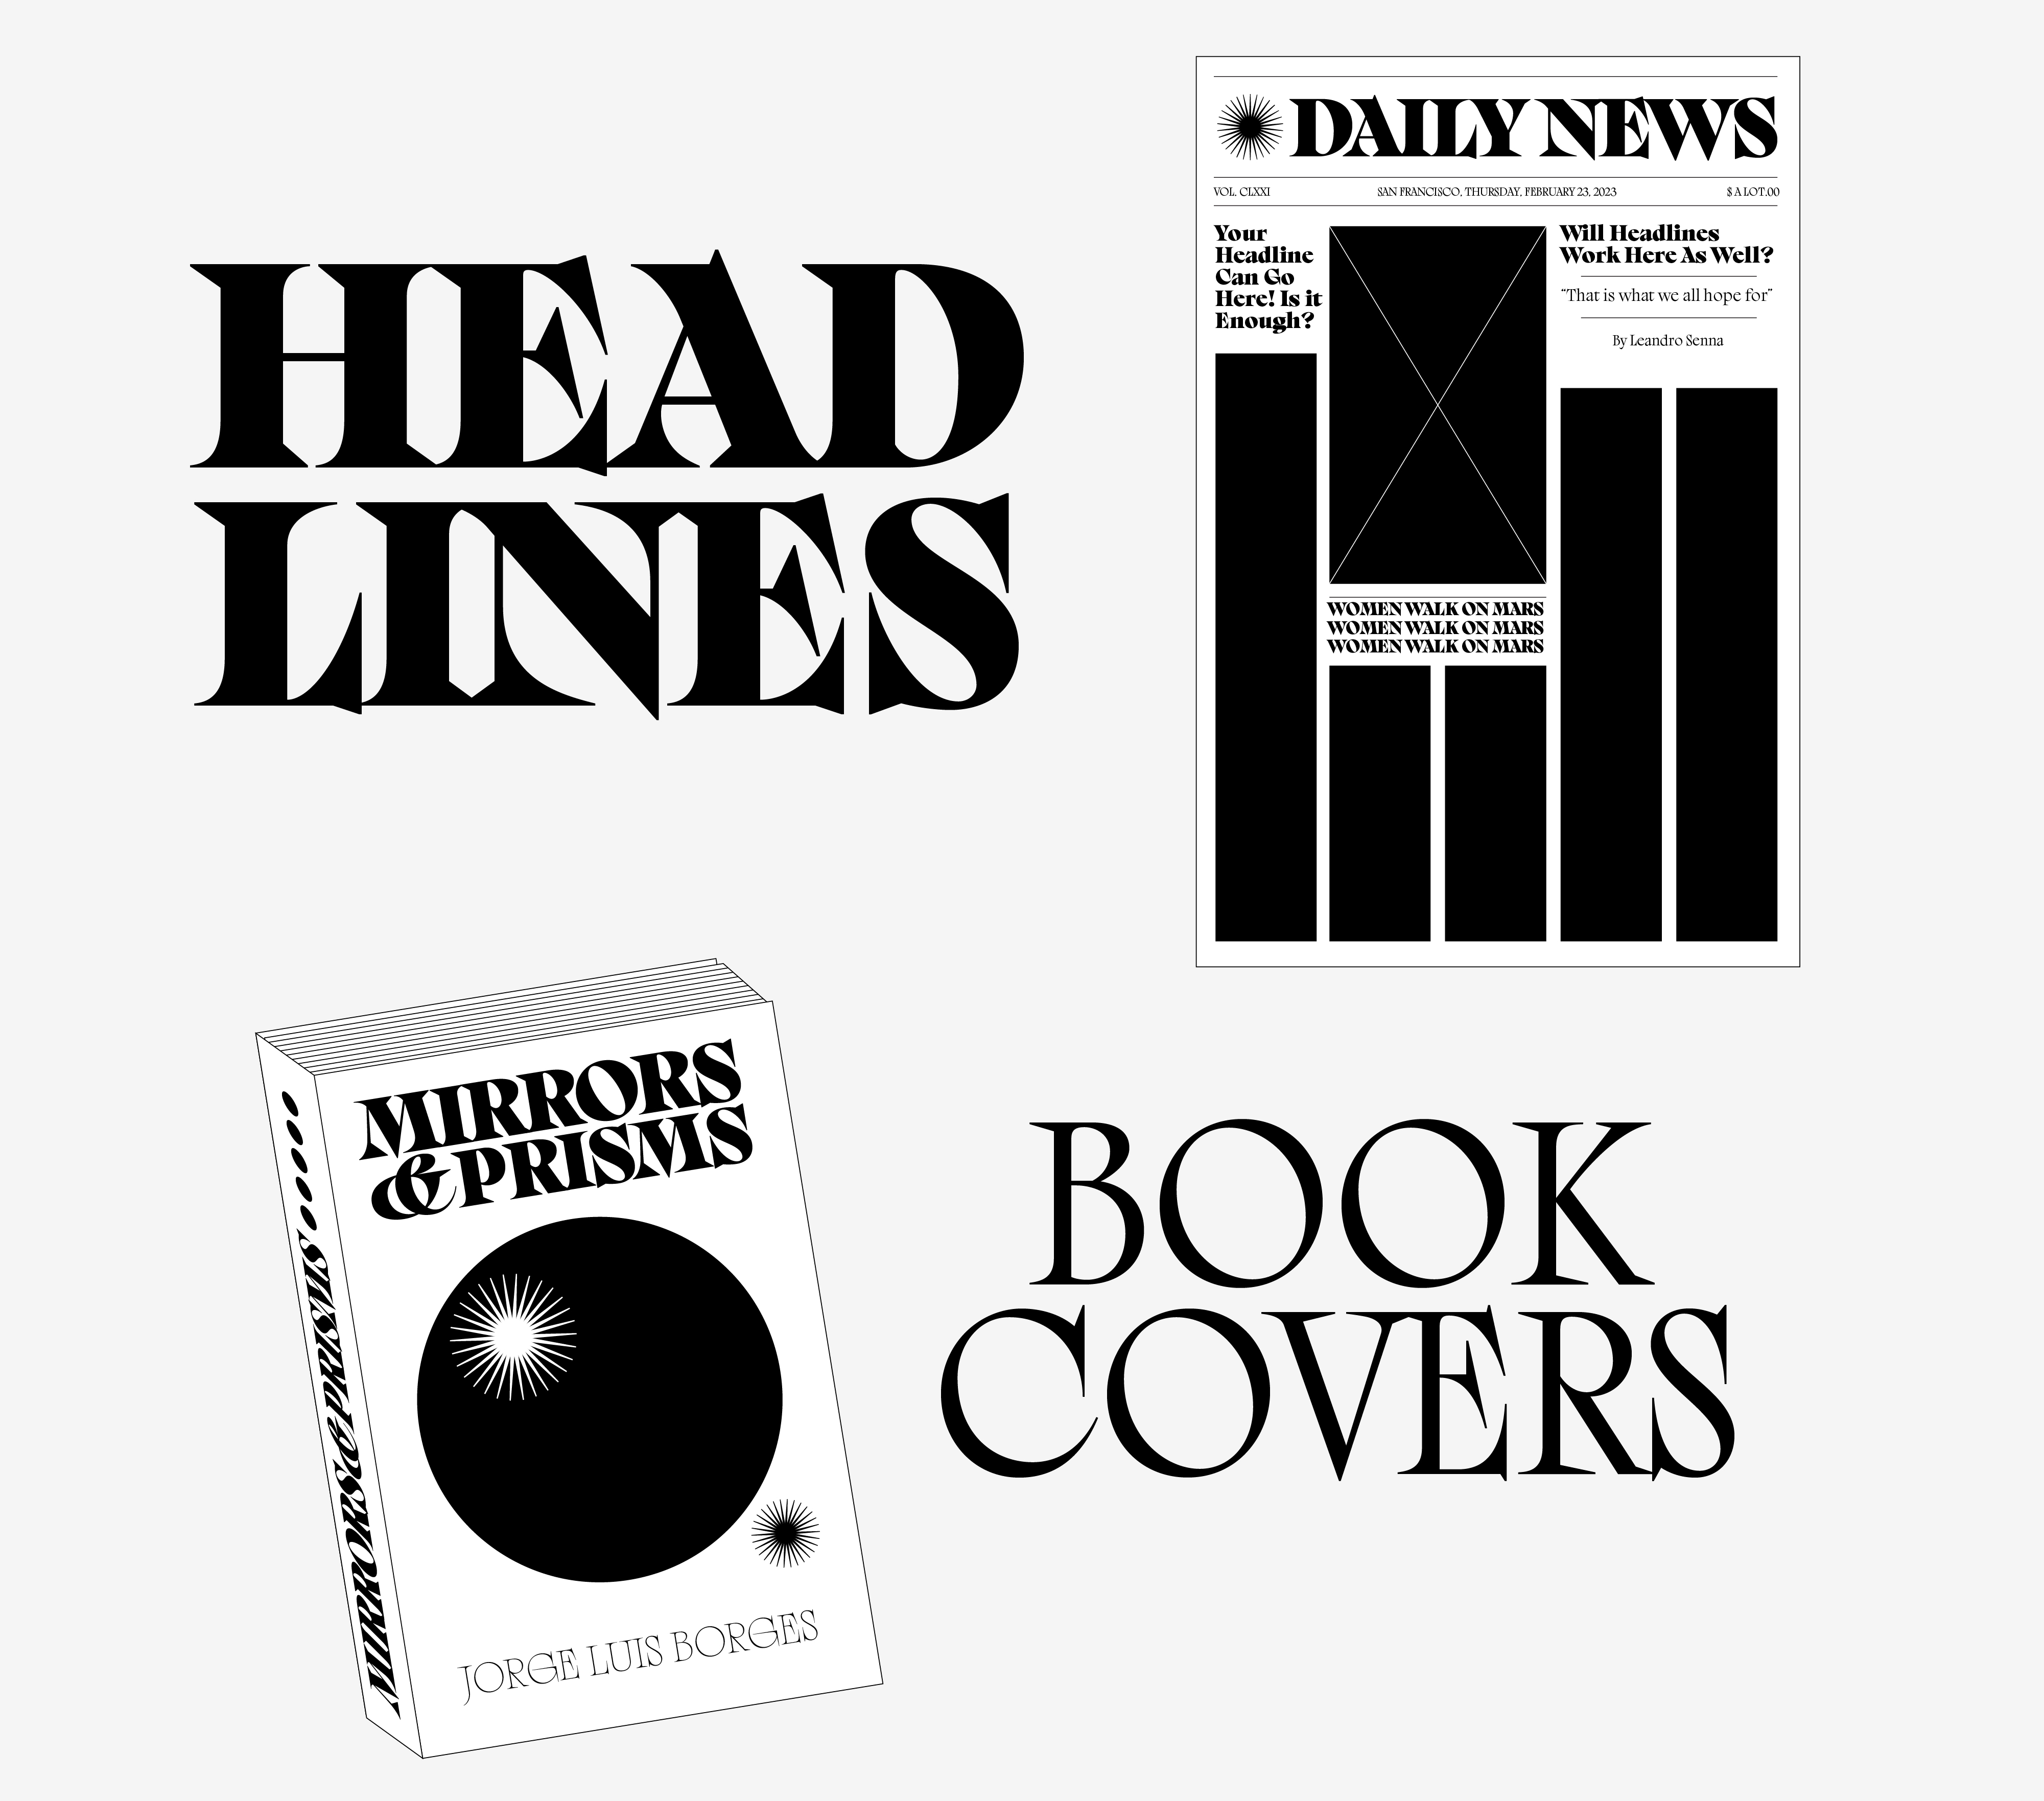 suggestion of usage for the font. It says Headlines with a newspaper illustration on the side AND also another suggestion for usage on Book Covers, with an Book illustration on the side